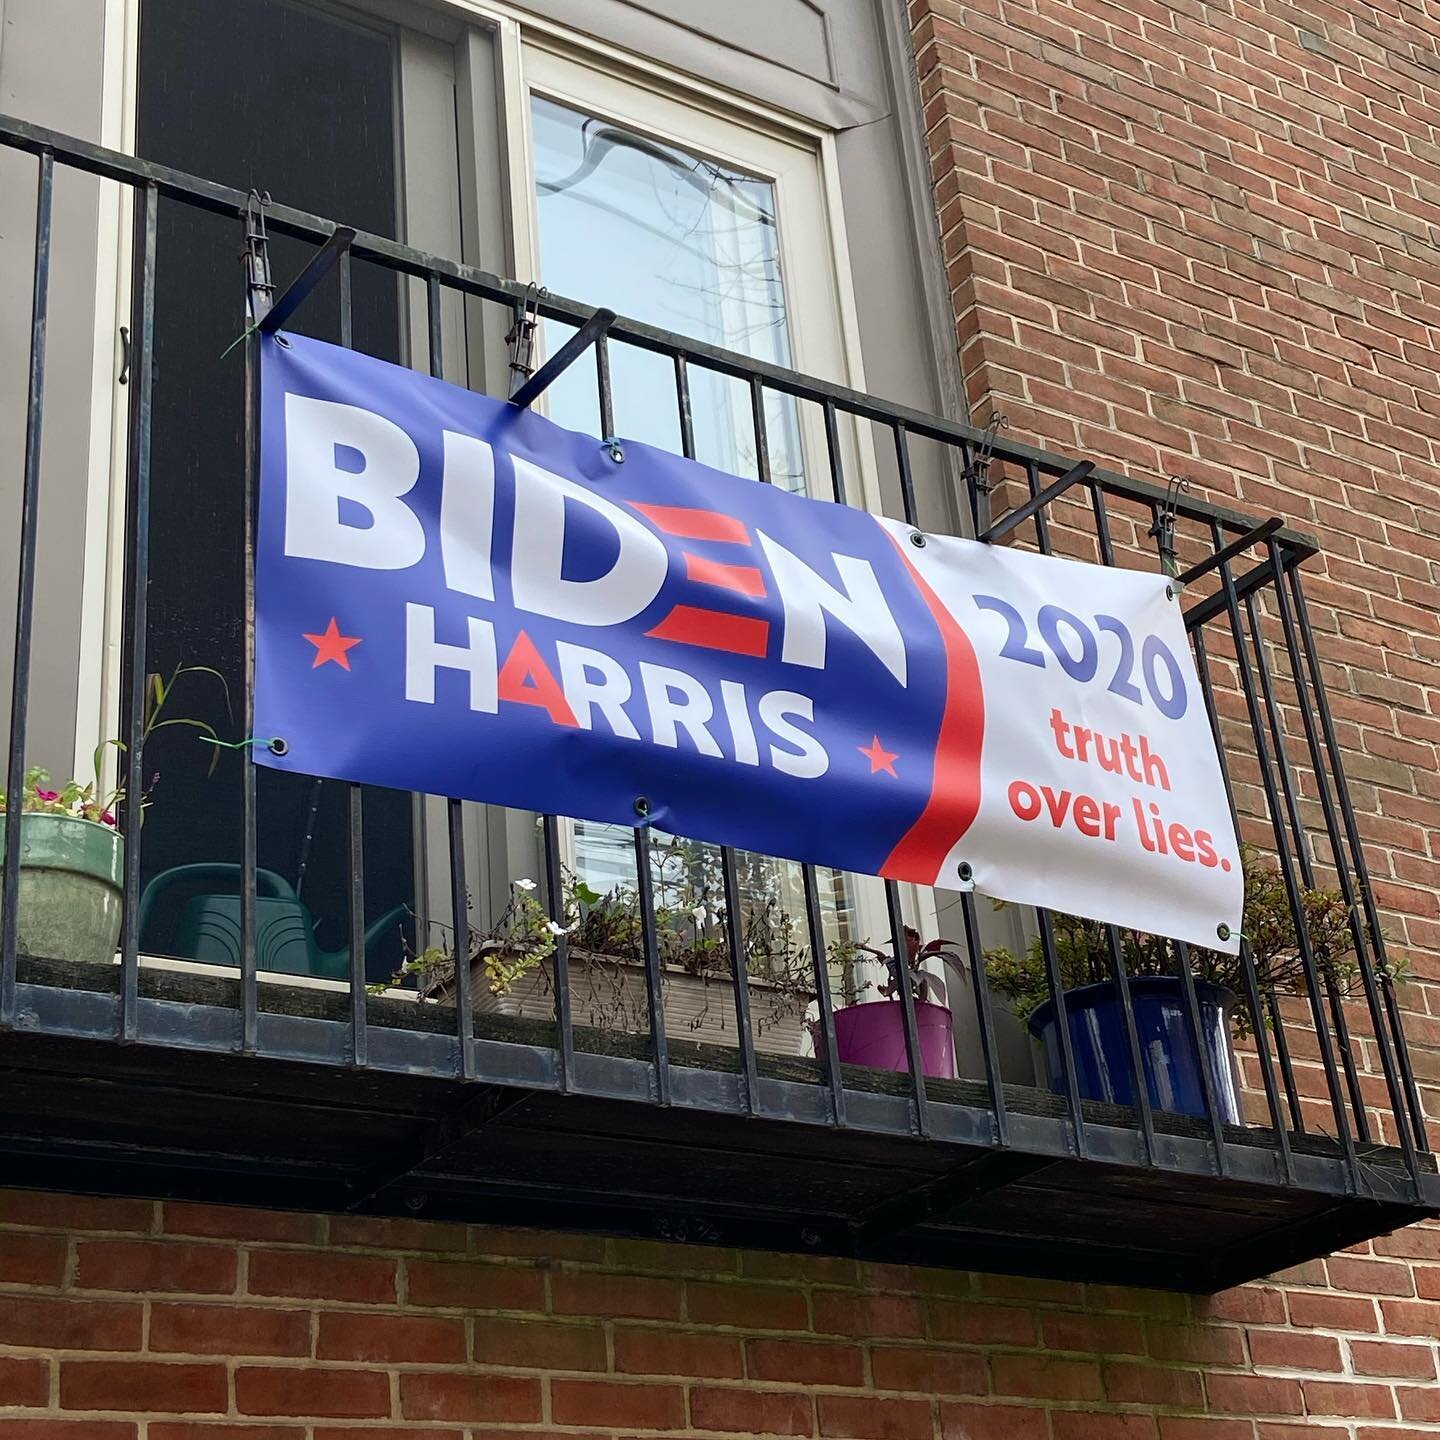 More signs, signs, signs around town today. Keeps sending photos of your favorites.
#phlgotv #vote2020 #bidenharris2020